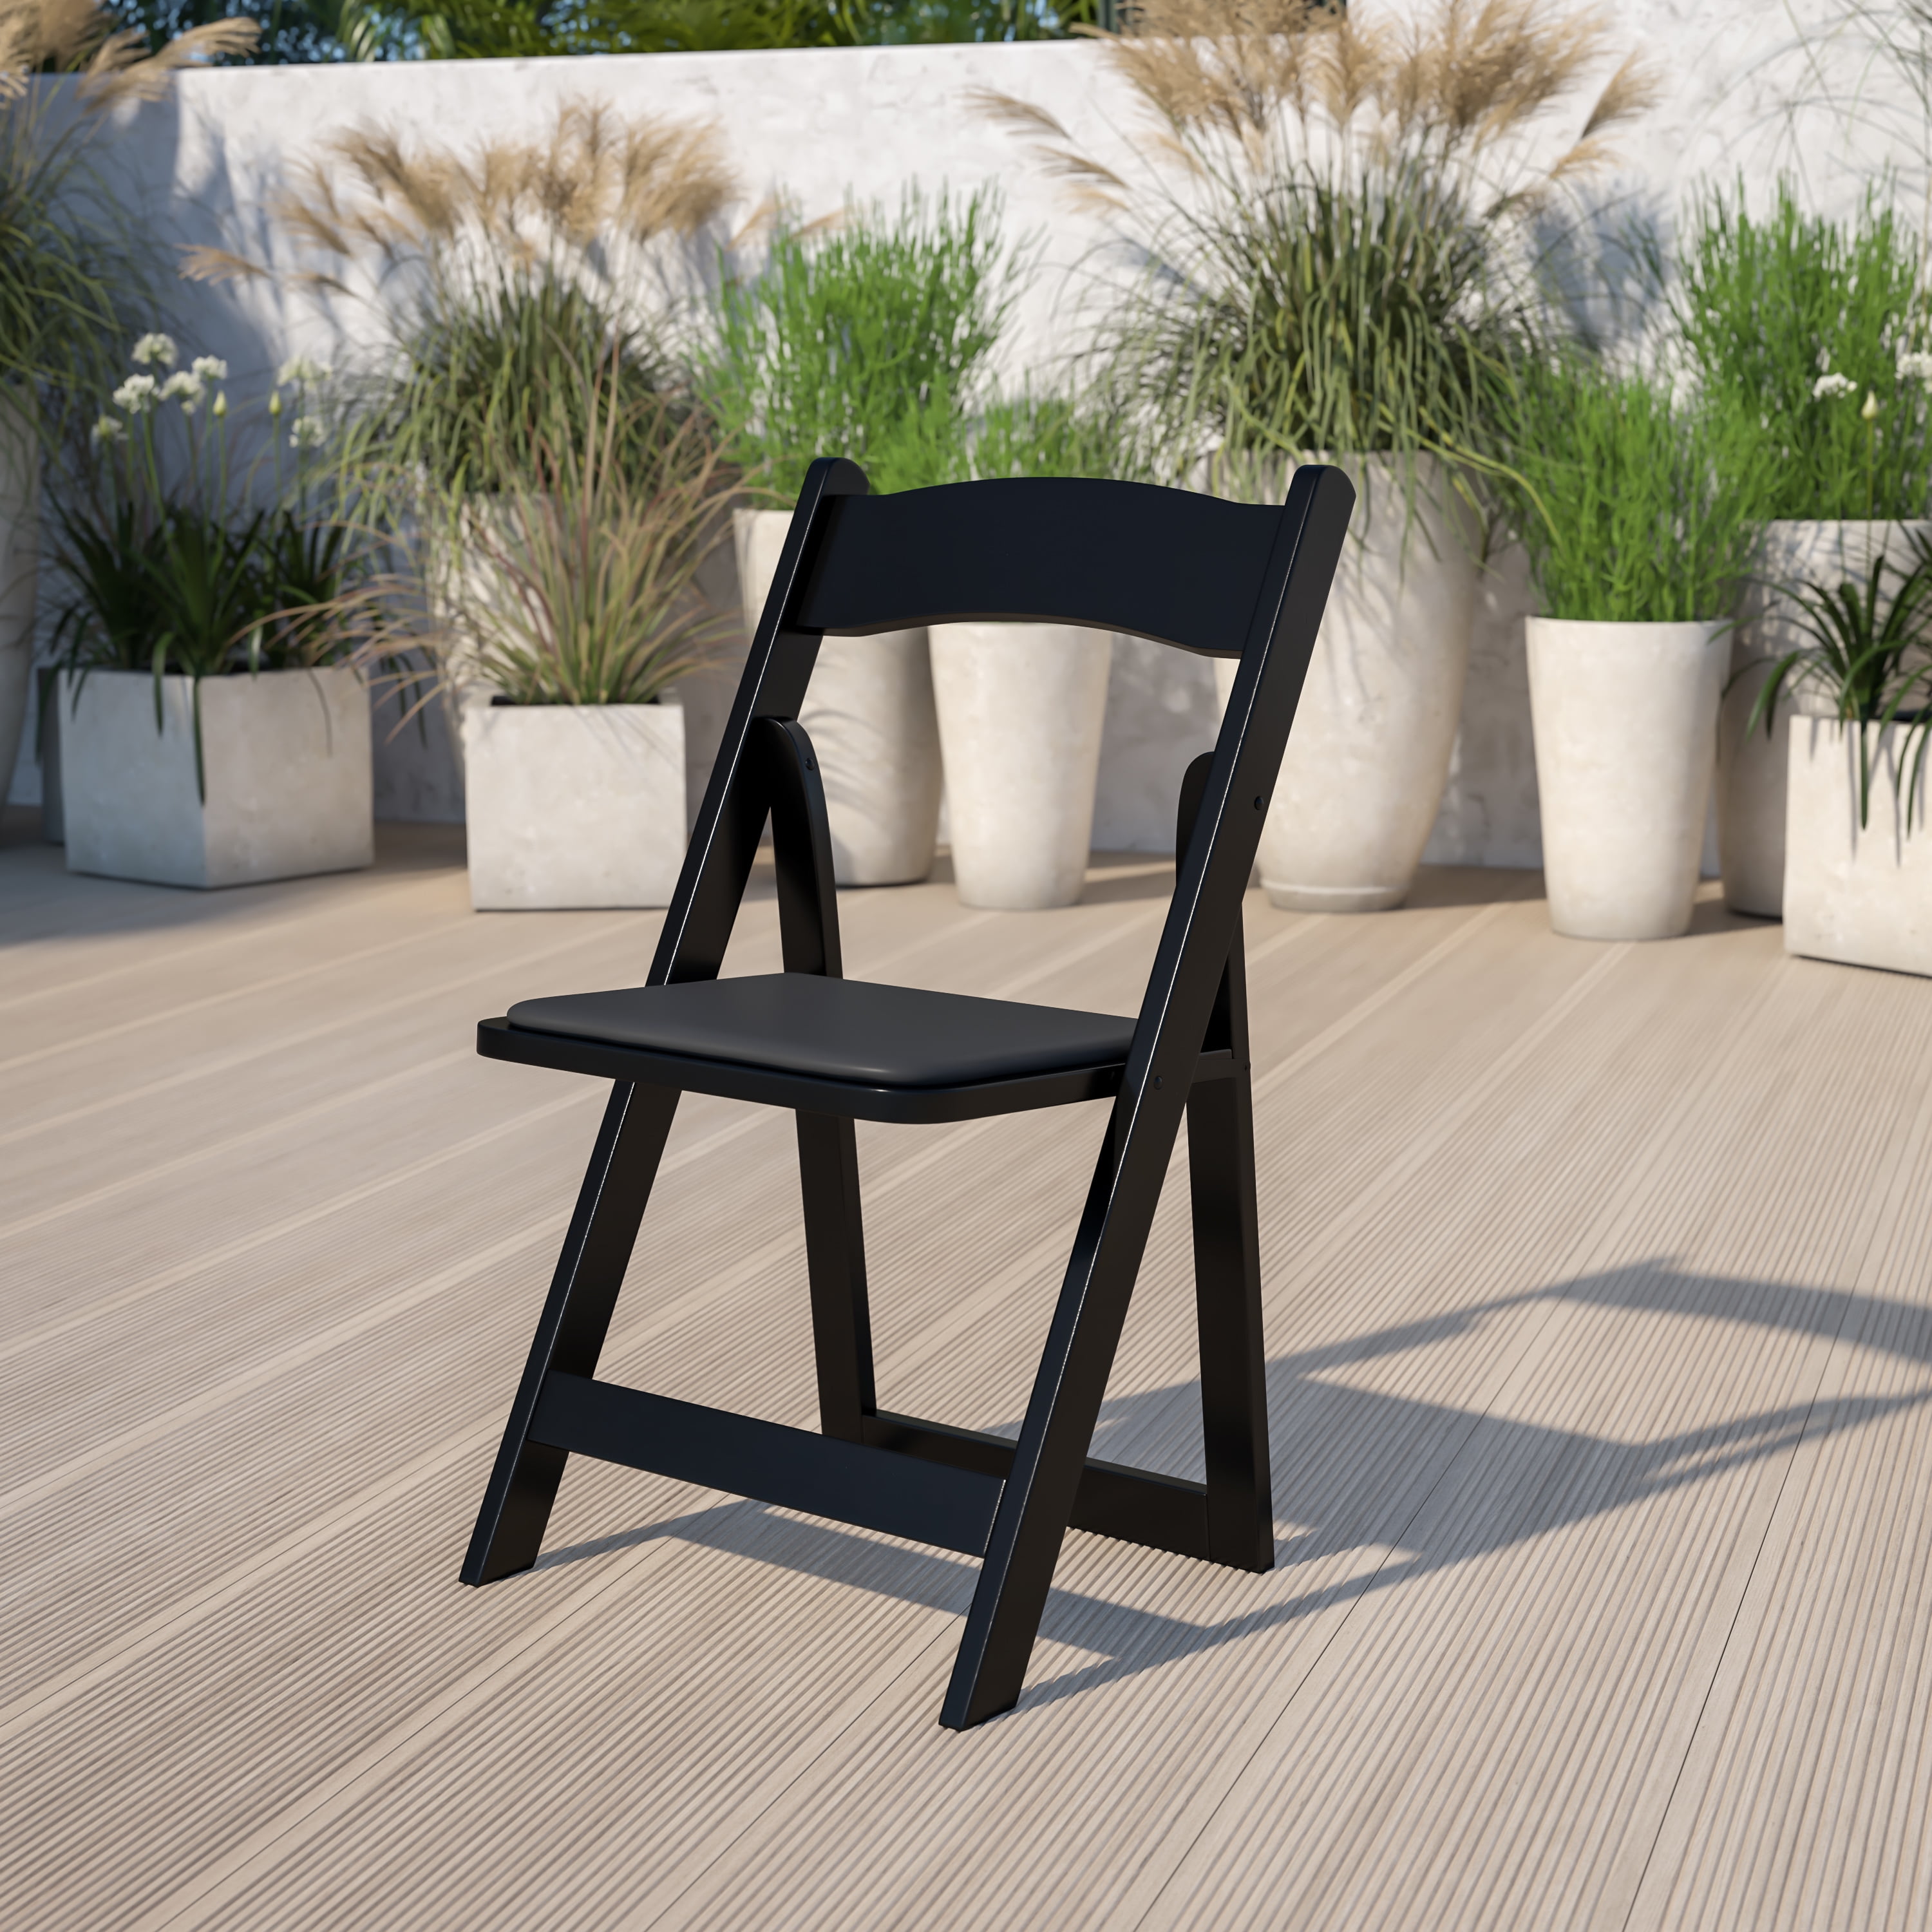 Black Wood Folding Chair with Vinyl Padded Seat 